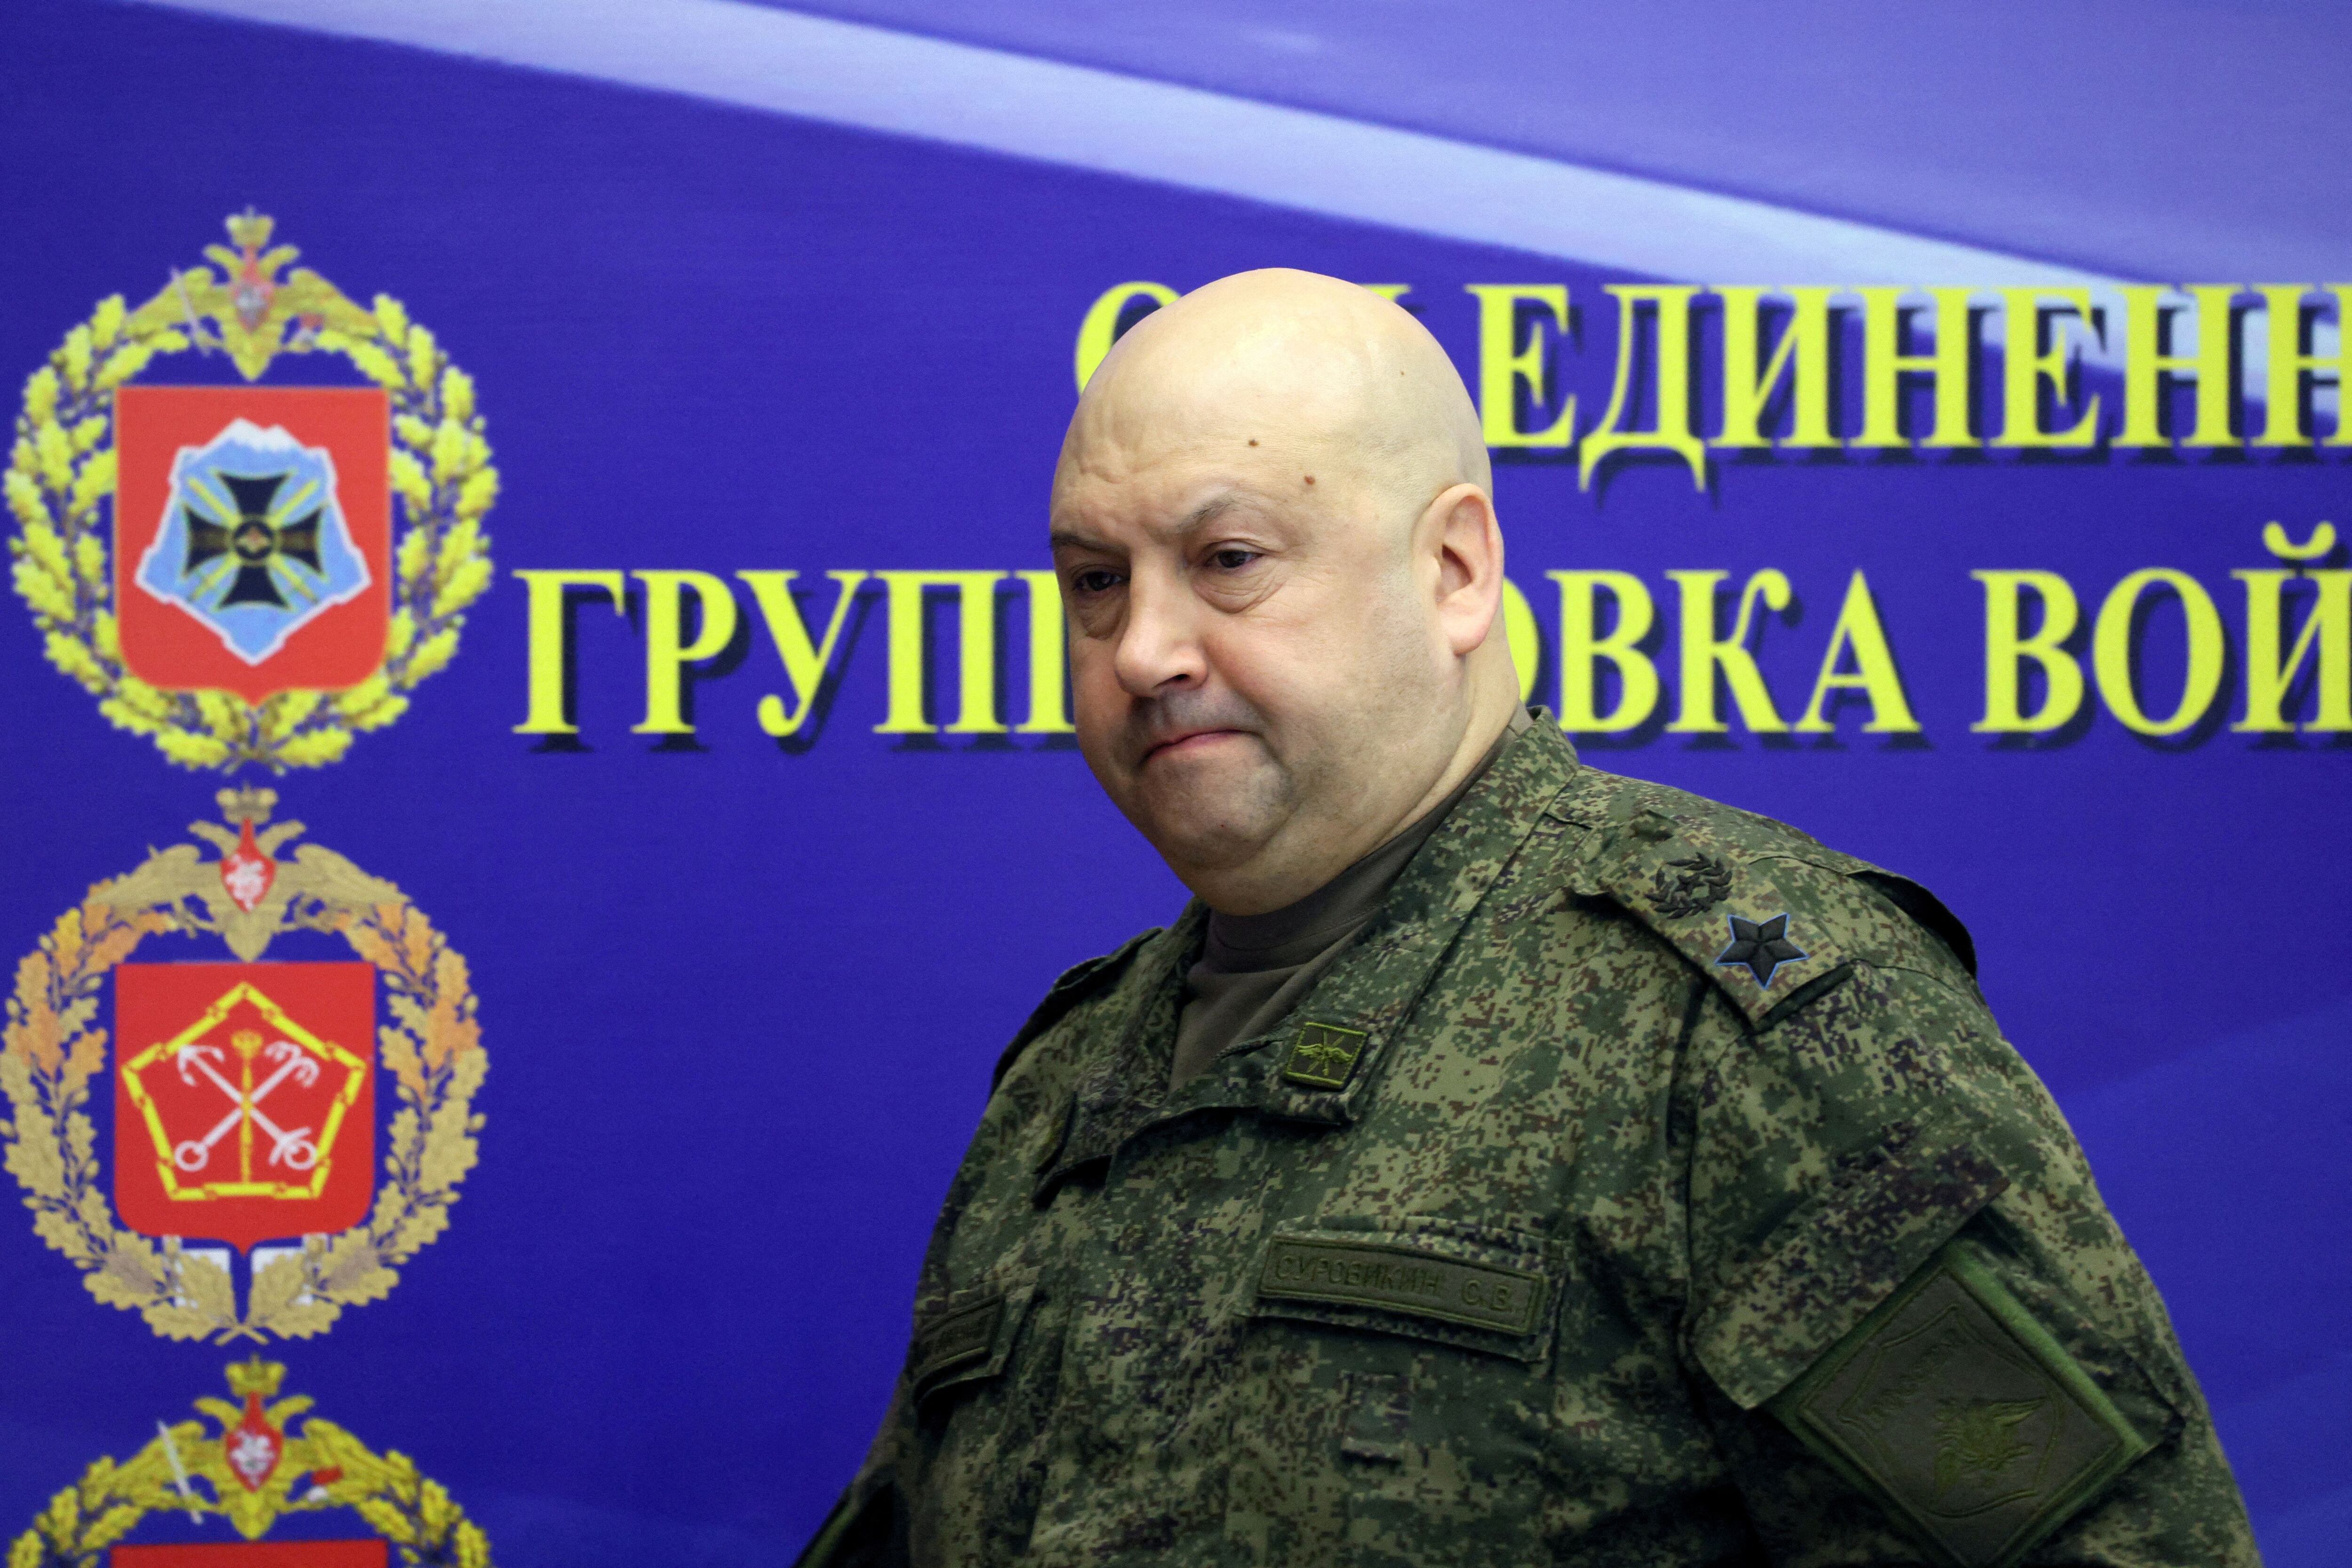 FILE PHOTO: General Sergei Surovikin, commander of Russian forces in Ukraine, visits the Joint Headquarters of the Russian armed forces involved in military operations in Ukraine, in an unknown location in Russia, in this picture released December 17, 2022. Sputnik/Gavriil Grigorov/Kremlin via REUTERS ATTENTION EDITORS - THIS IMAGE WAS PROVIDED BY A THIRD PARTY./File Photo